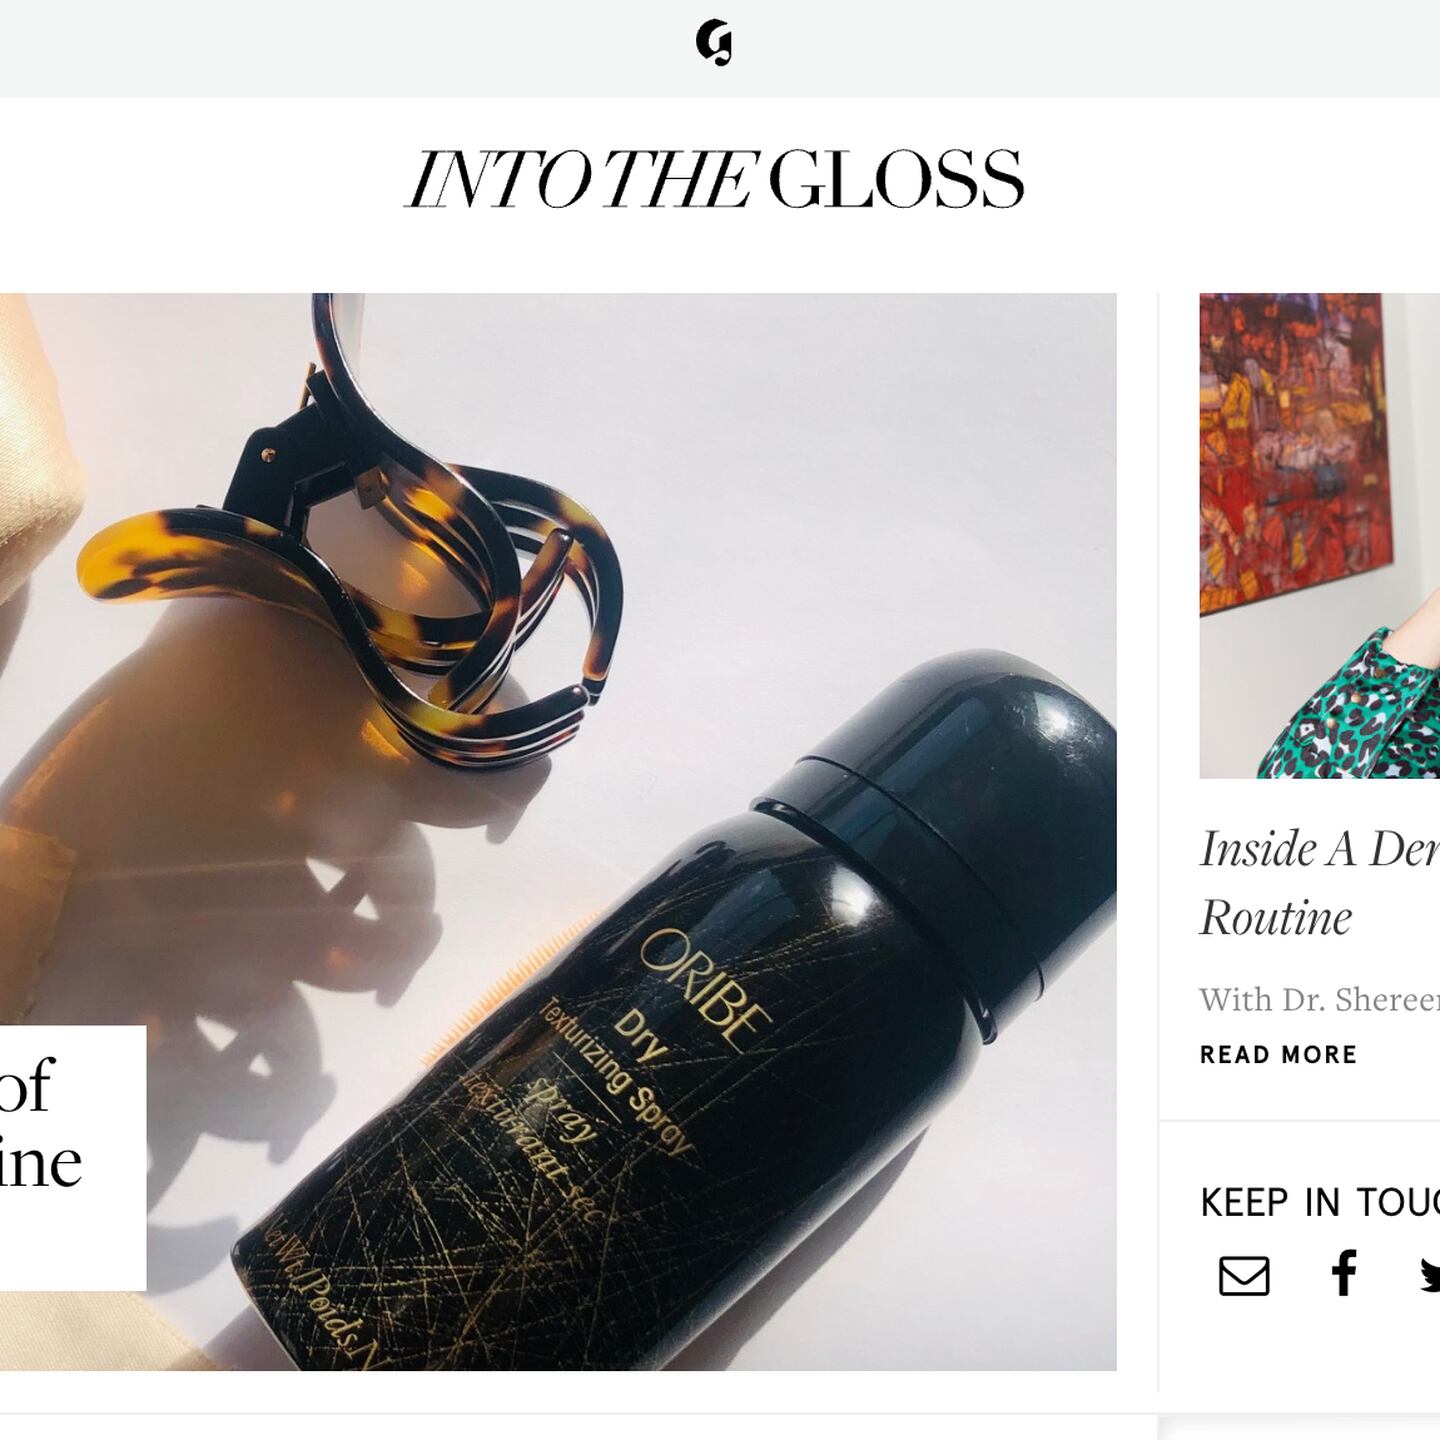 What's Going On at Into the Gloss?